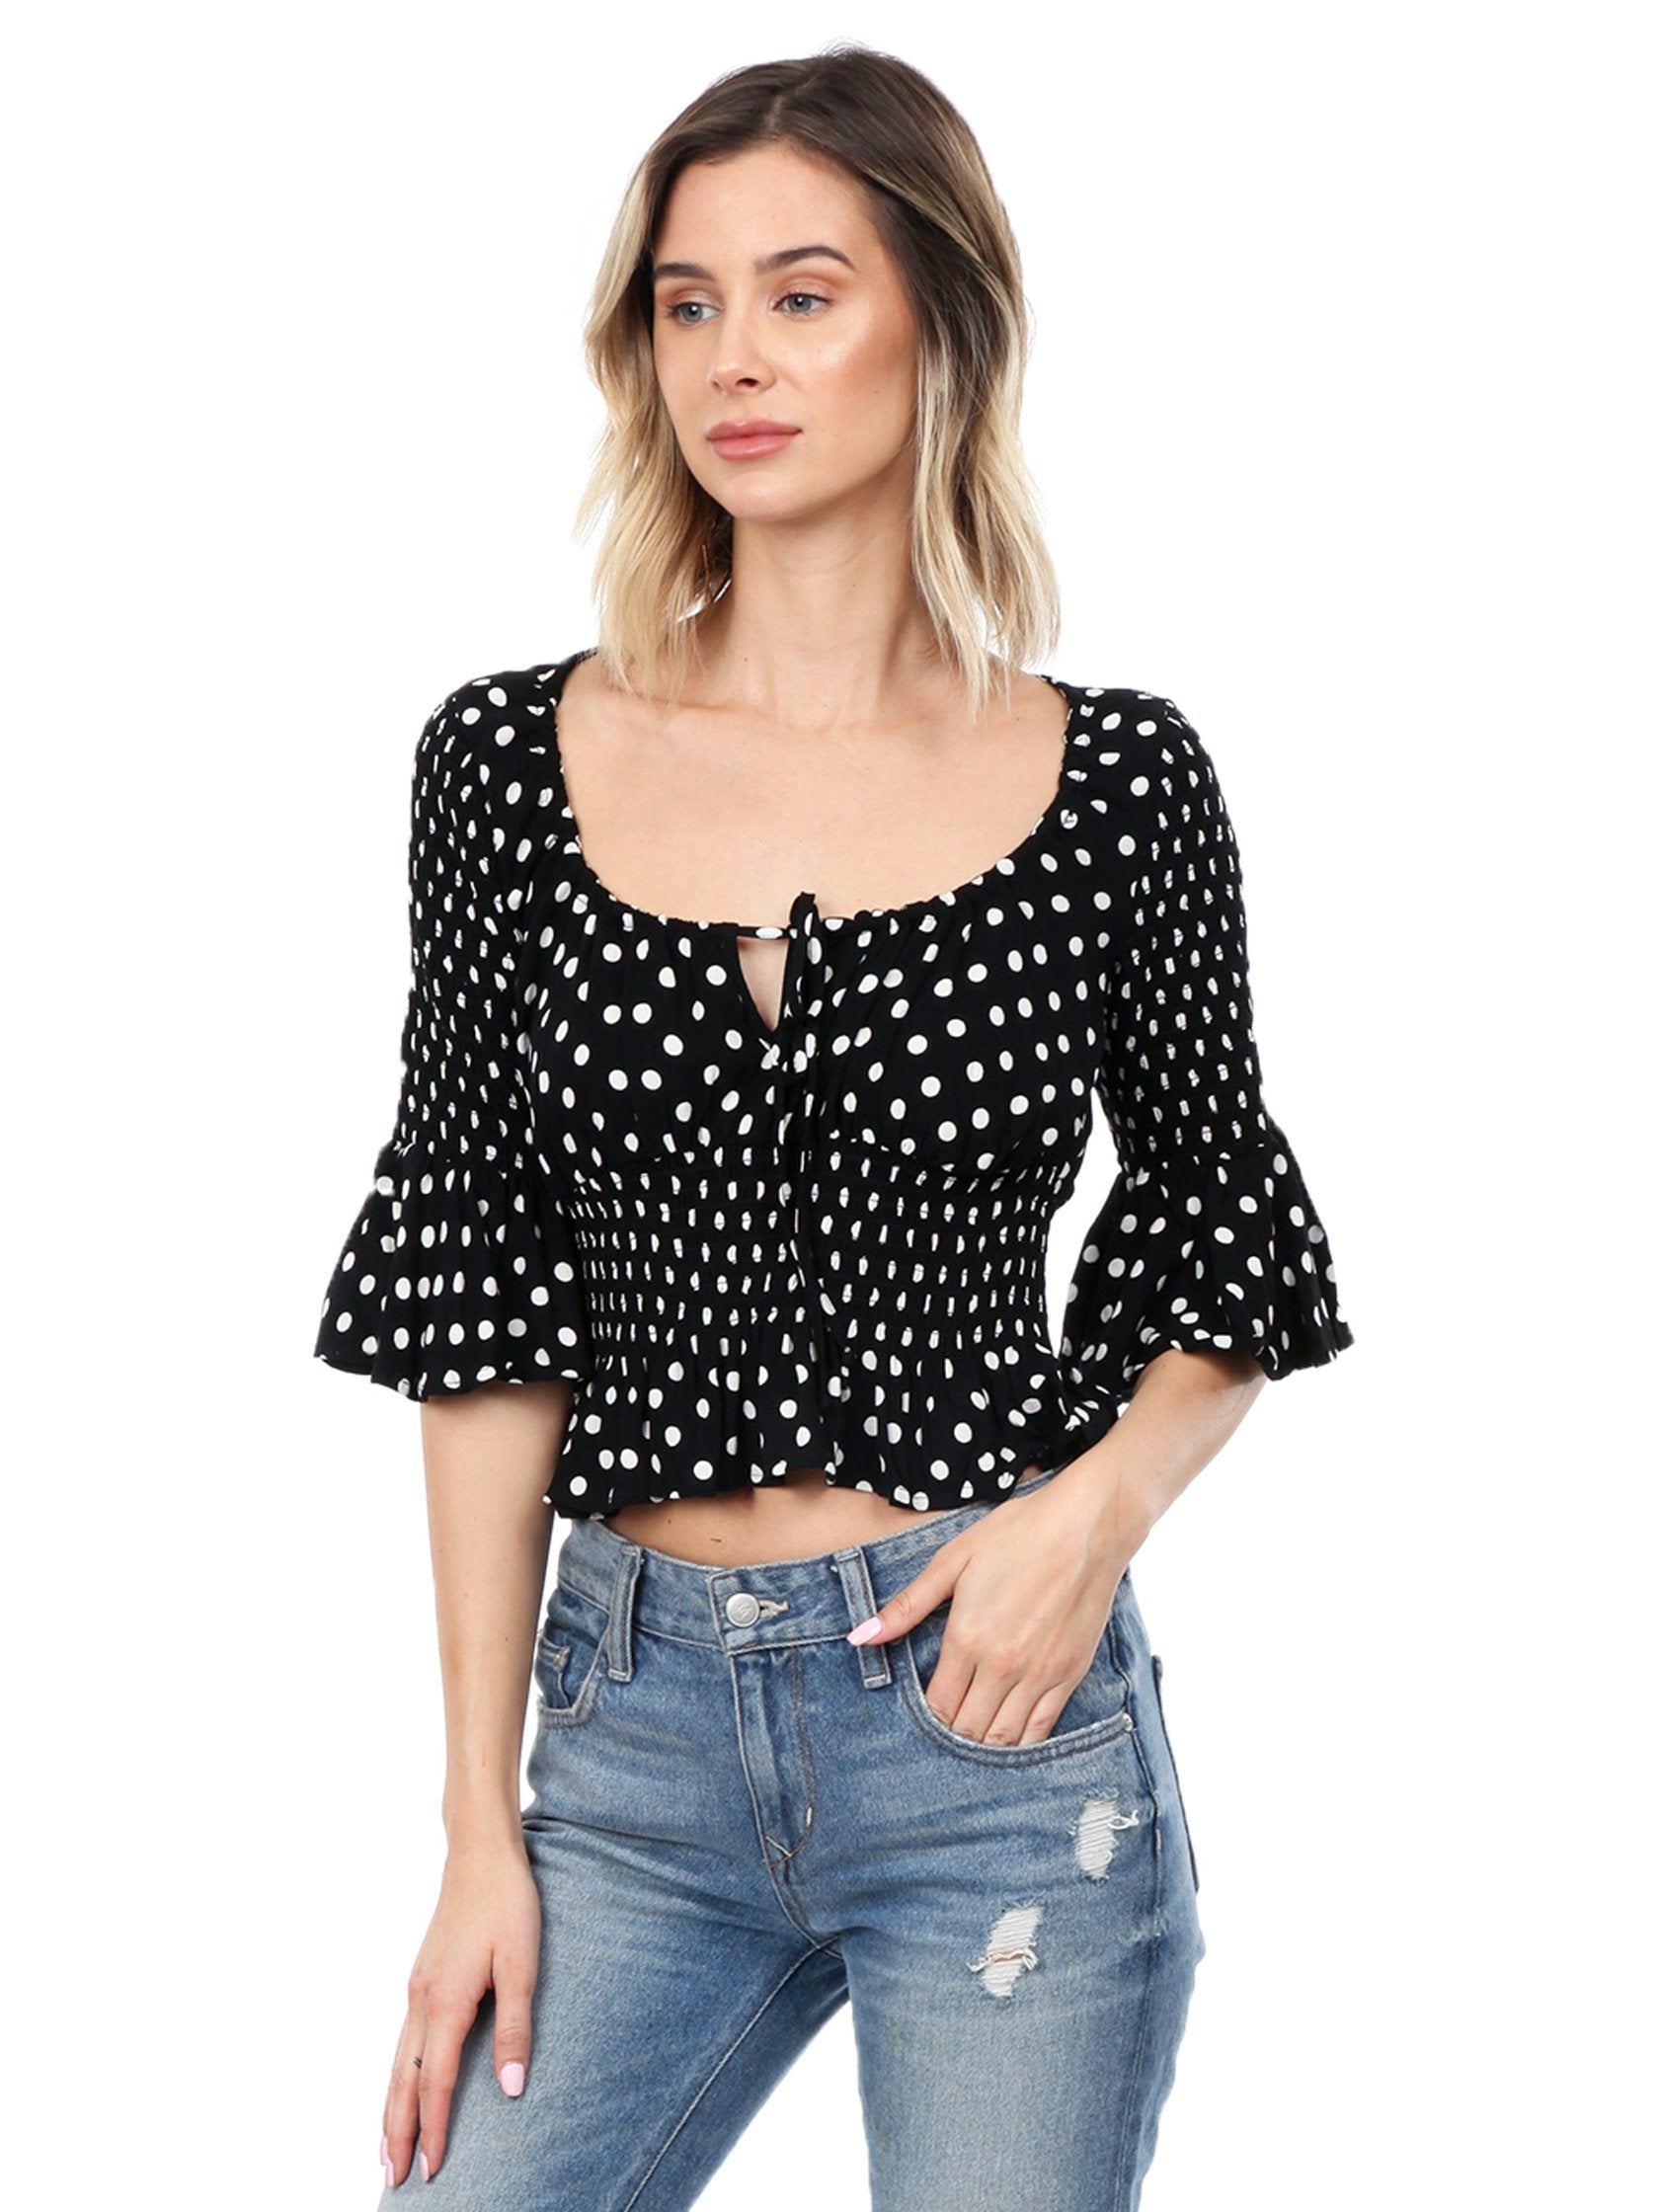 Women wearing a top rental from Free People called A Little Bit Of Something Sweet Top